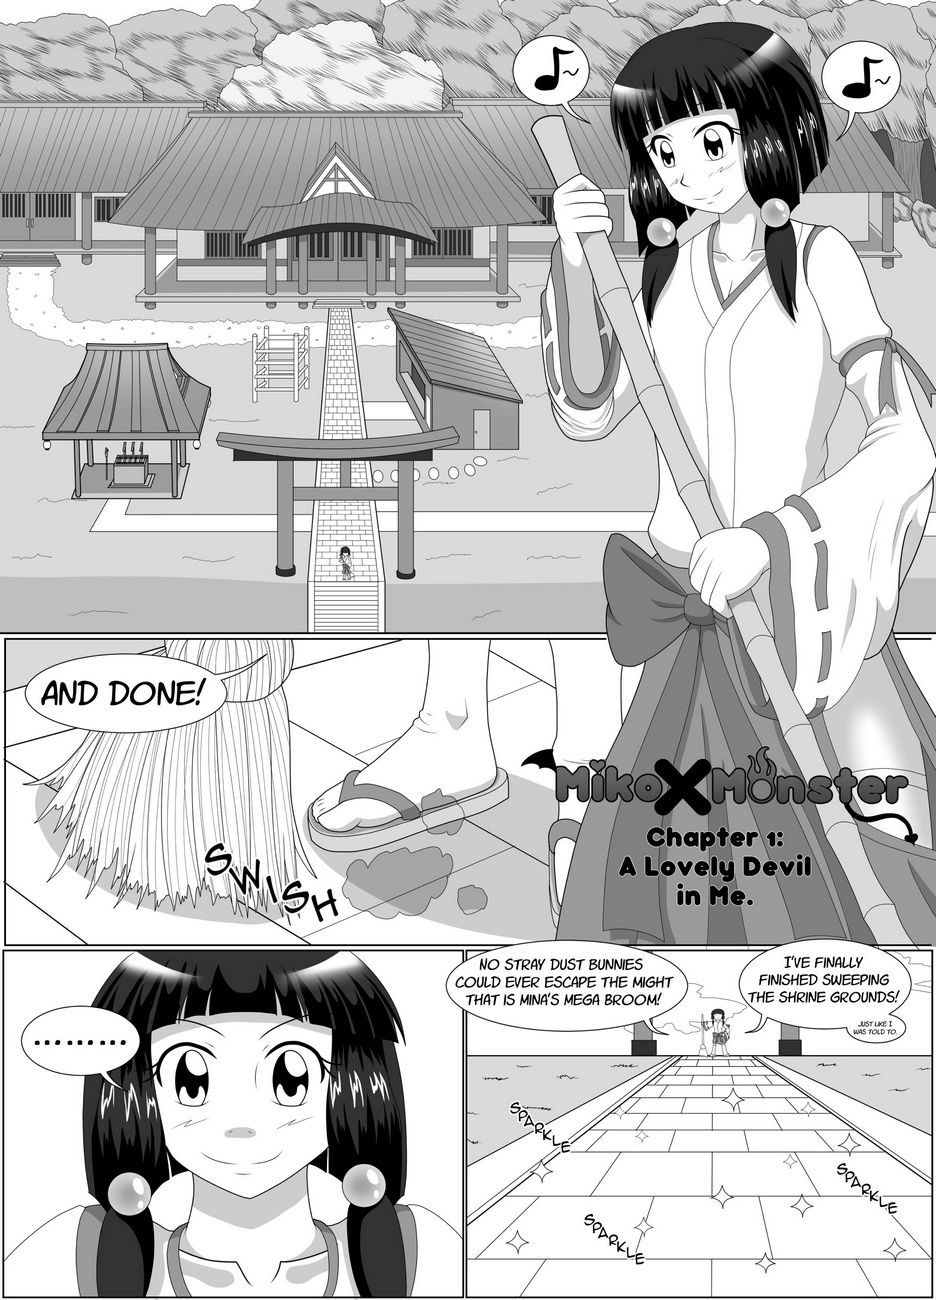 Miko X Monster 1 page 1